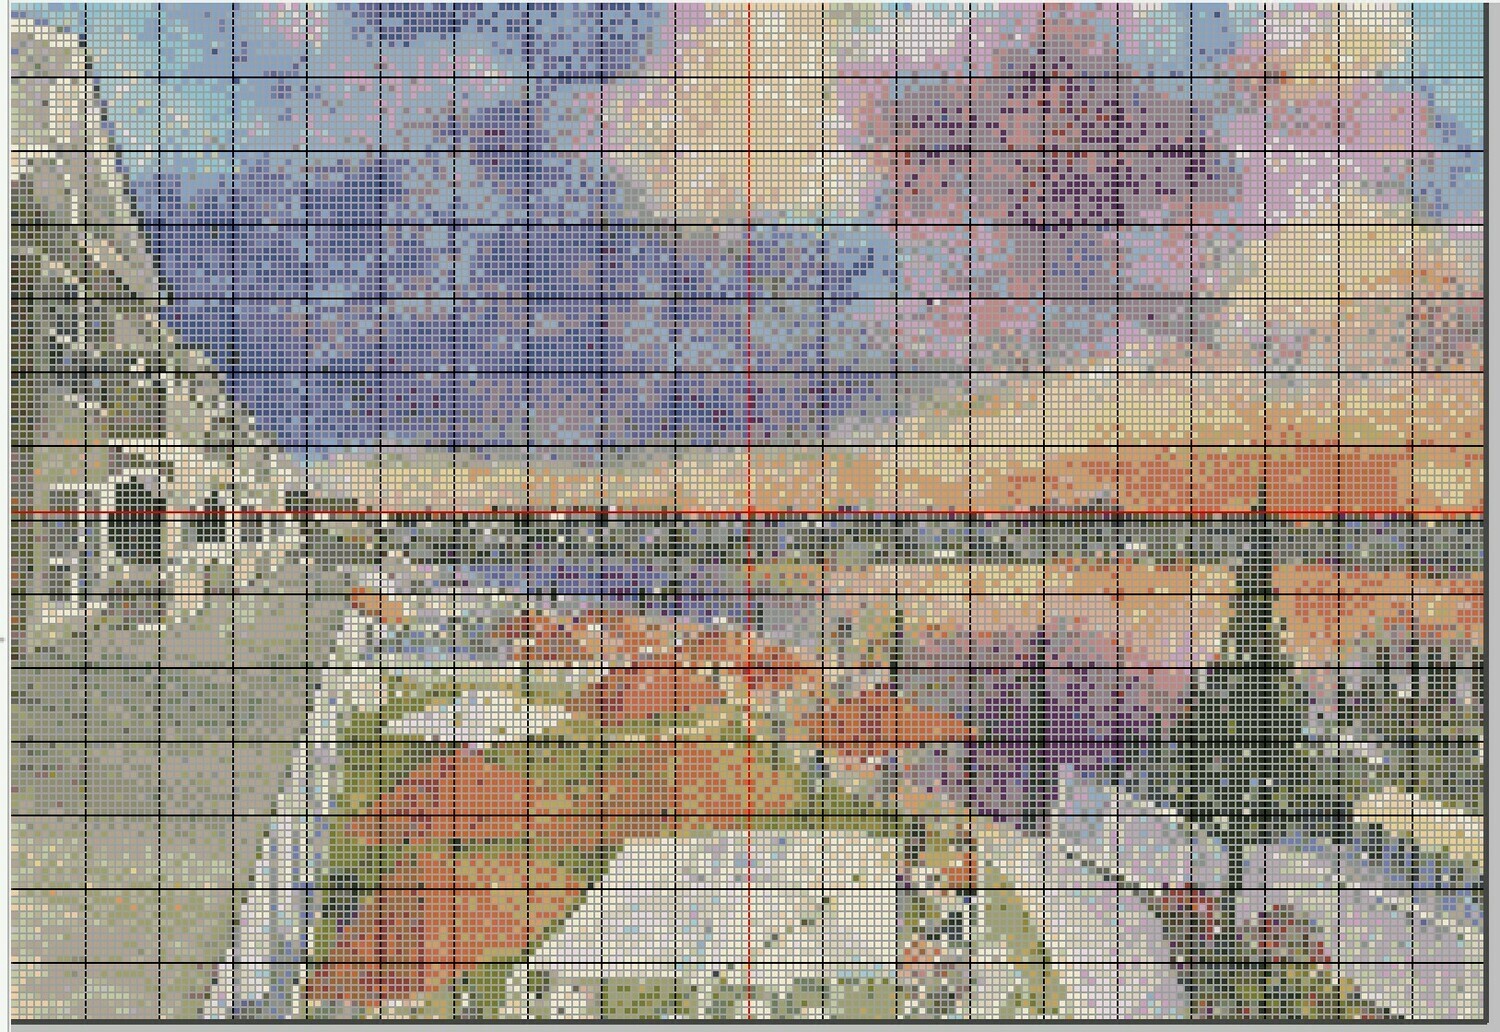 Stone Harbor Cross Stitch - The Reeds at Shelter Haven - Pattern Only - Instant Digital Download